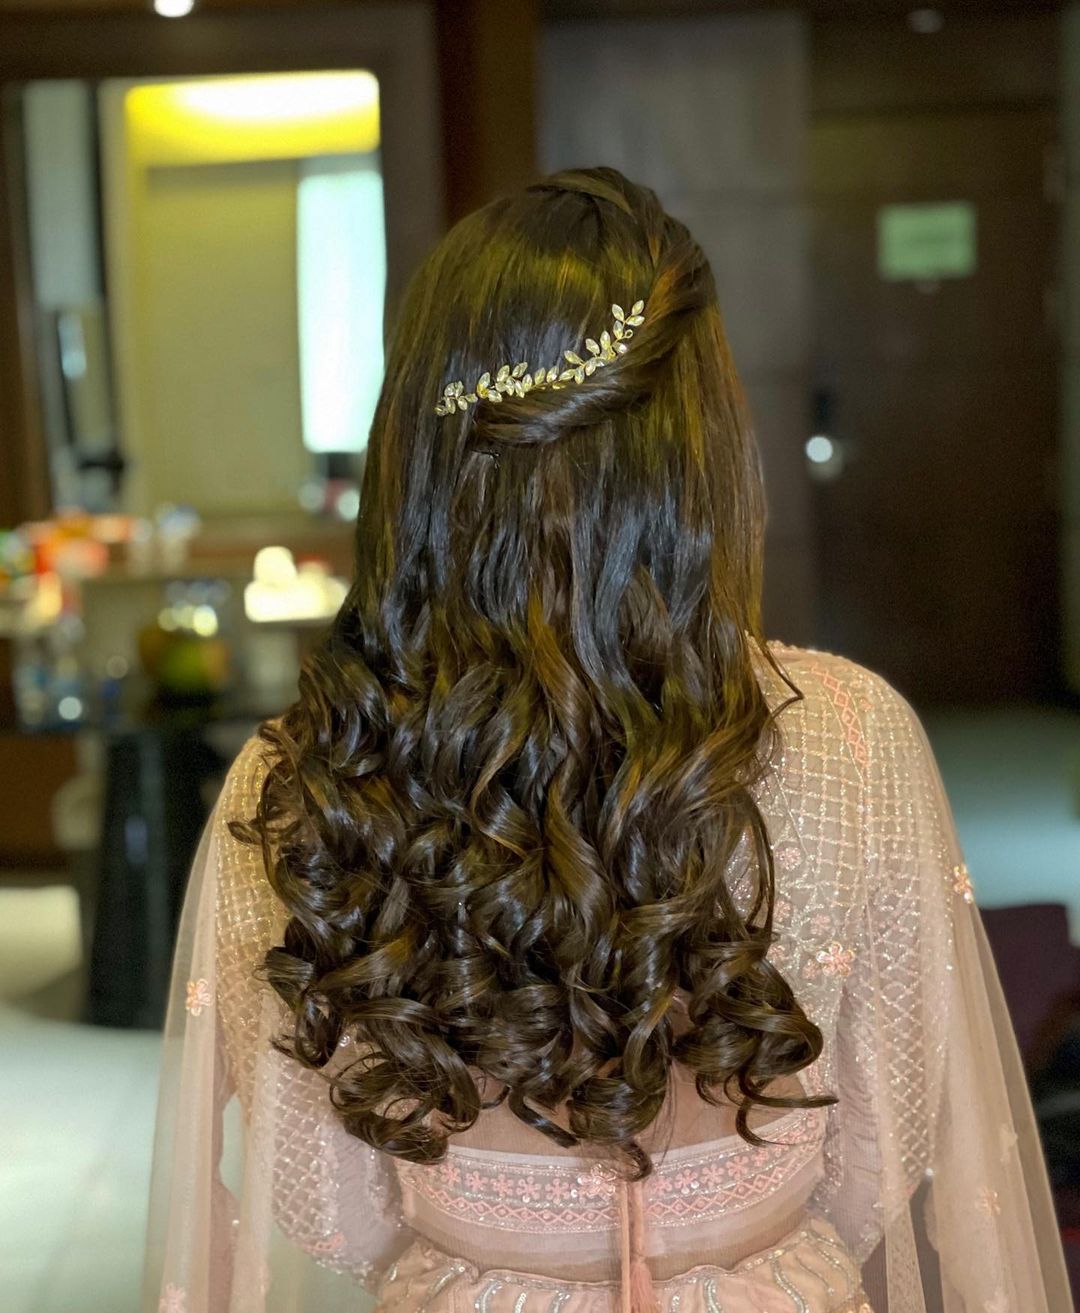 Trending Bridal Hairstyle Ideas For Engagement Ceremony